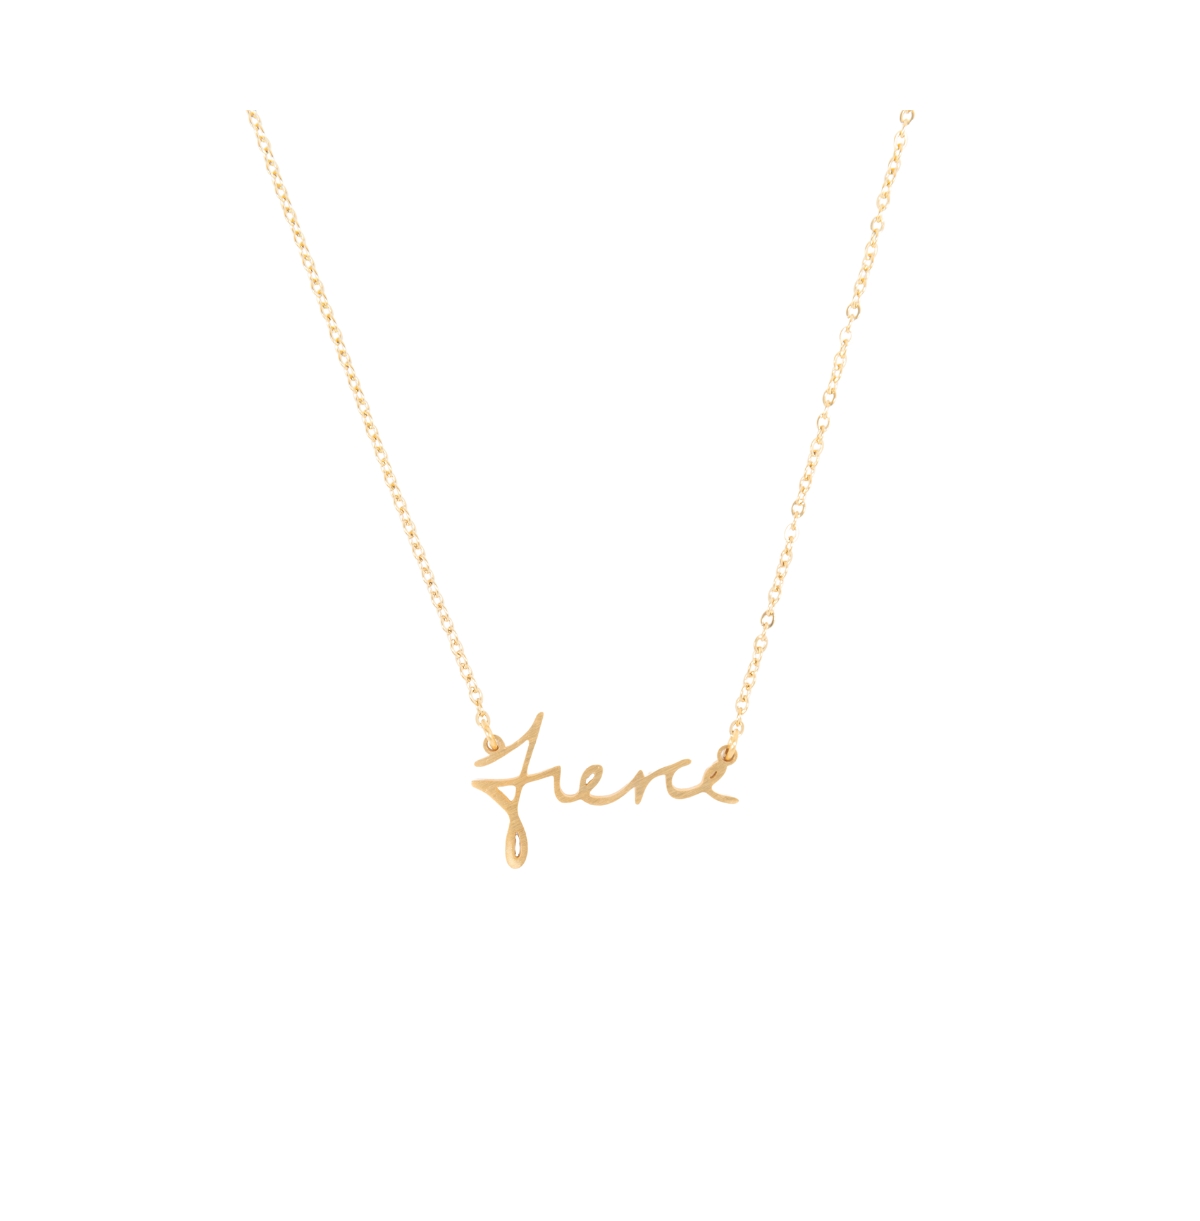 316L Absolute Affirmation "Fierce" Necklace - Silver